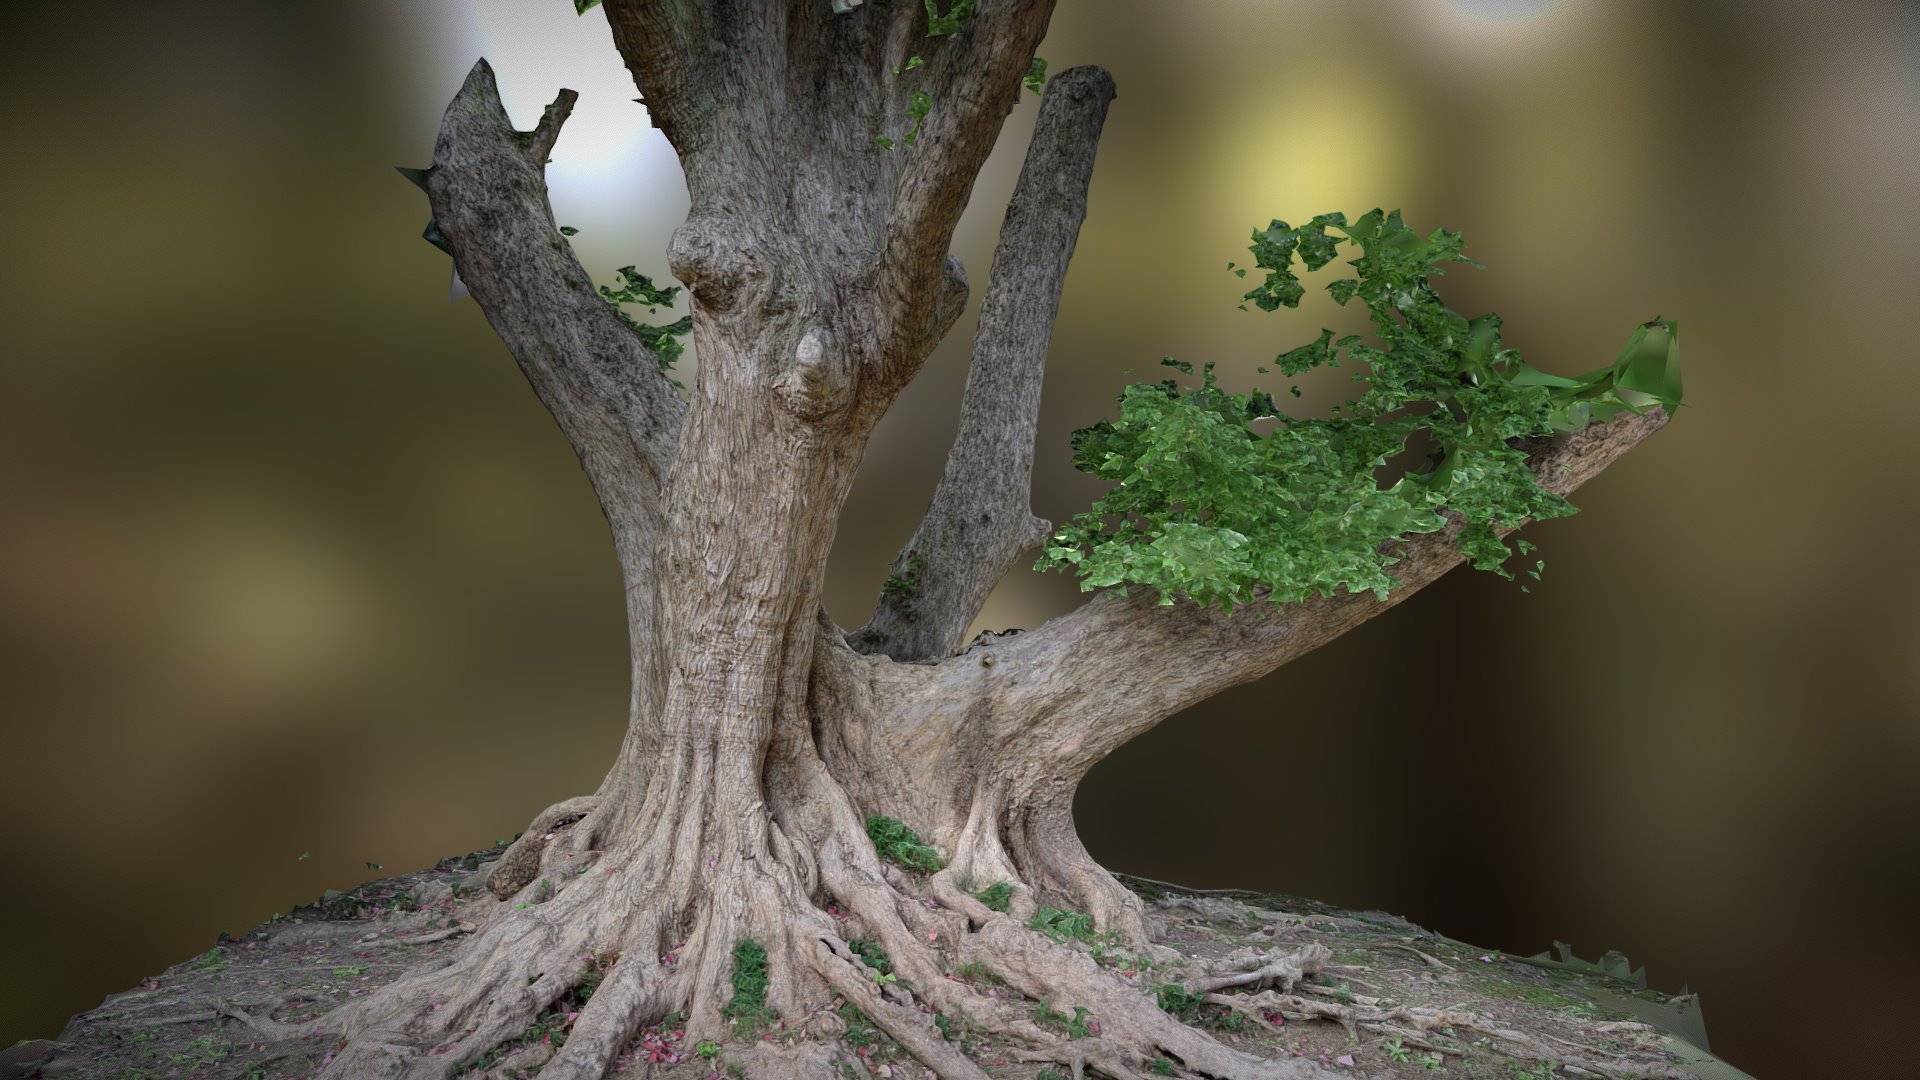 3D model Tree photogrammetry scan - This is a 3D model of the Tree photogrammetry scan. The 3D model is about a tree with a small plant growing on it.